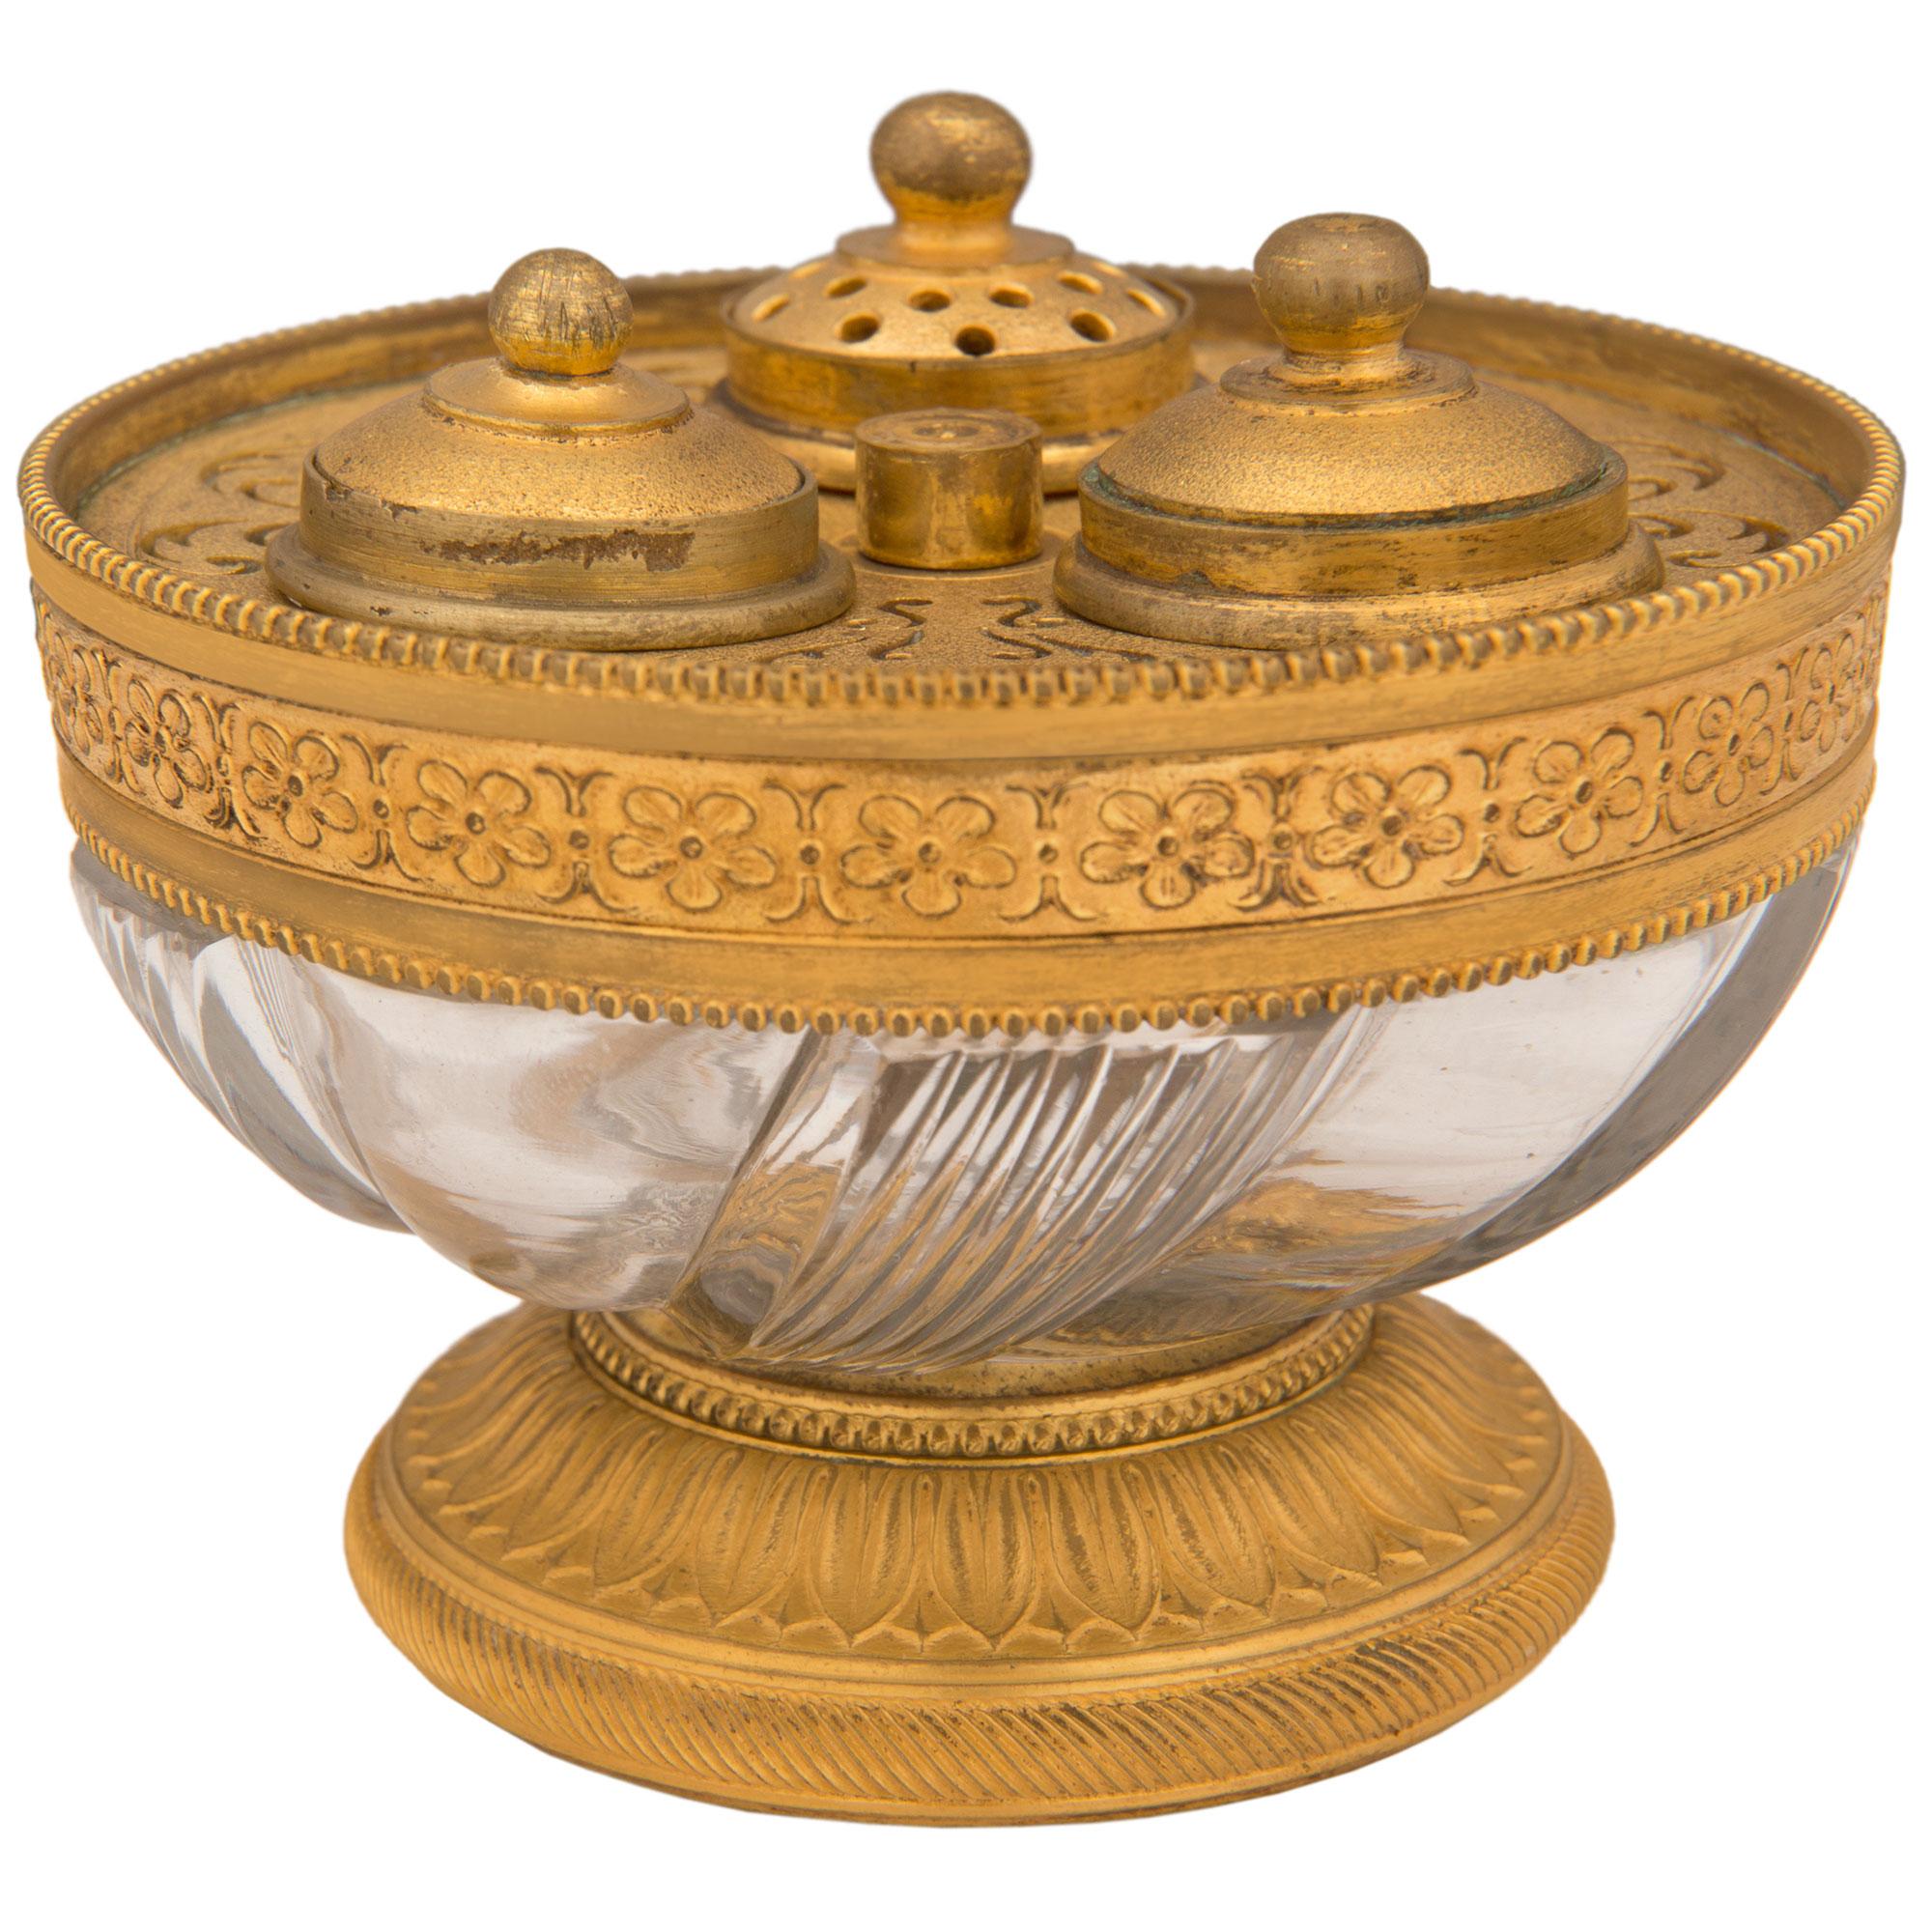 An elegant French 19th century Louis XVI st. ormolu and crystal inkwell. The inkwell is raised by a fine circular ormolu base with a lovely reeded and richly chased palmette design. Above the fine mottled base is the beautiful crystal bowl with a